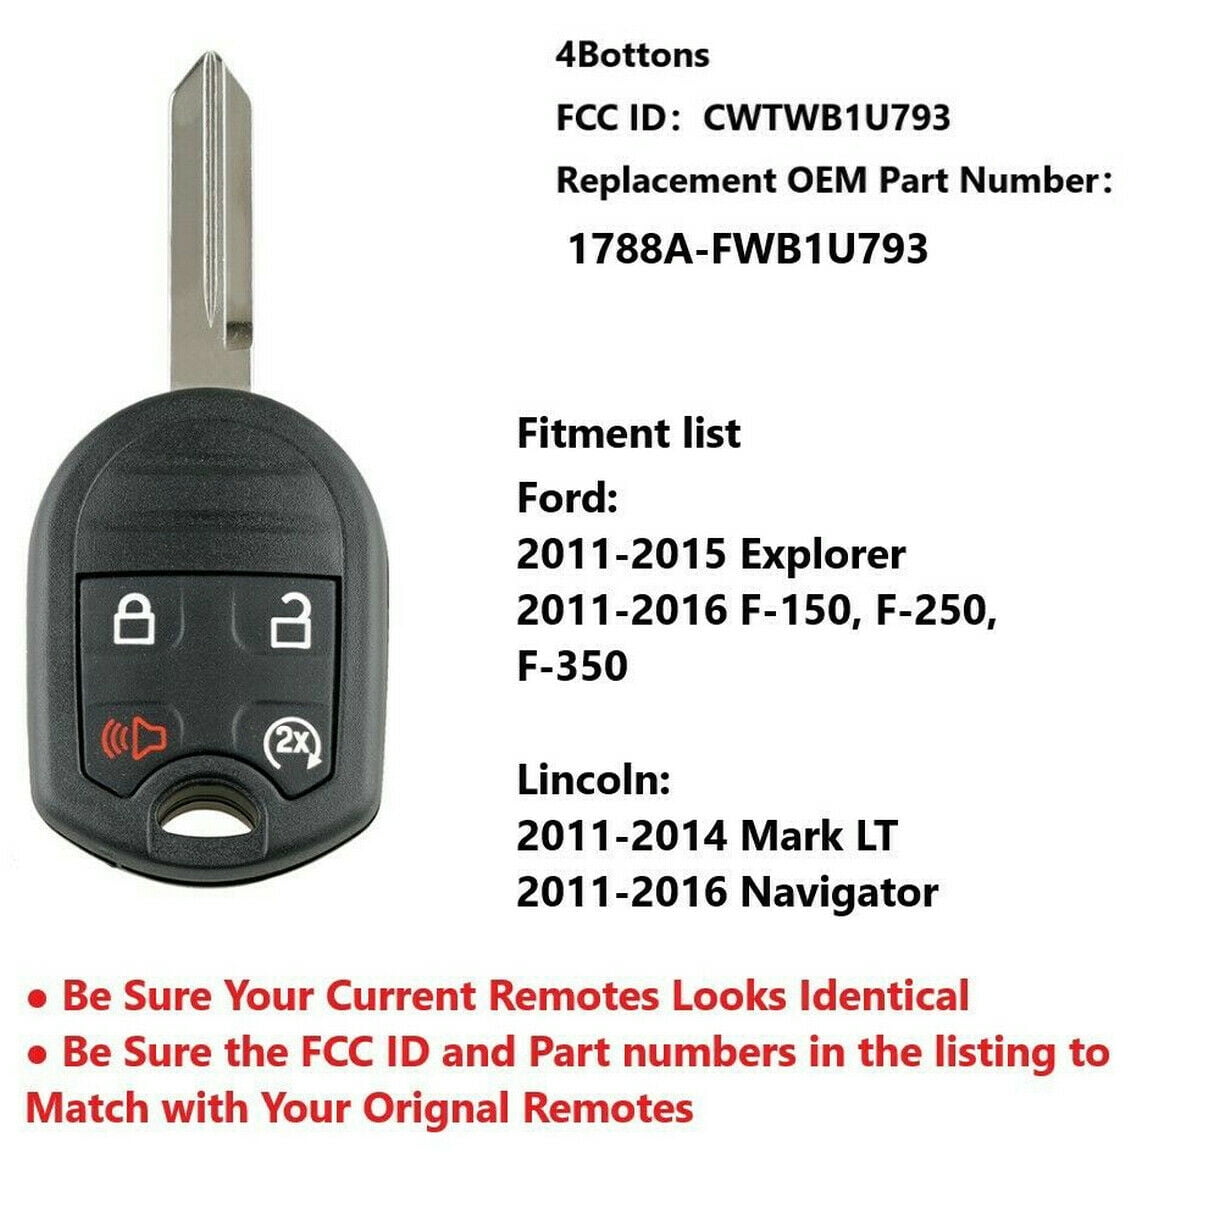 Ford F-350,for FCC ID CWTWB1U793 Maxiii Keyless Remote Car Key Fob 4 Button with Electronics and Batteries Compatible for 2011 2012 2013 2014 2015 2016 Ford F-150 